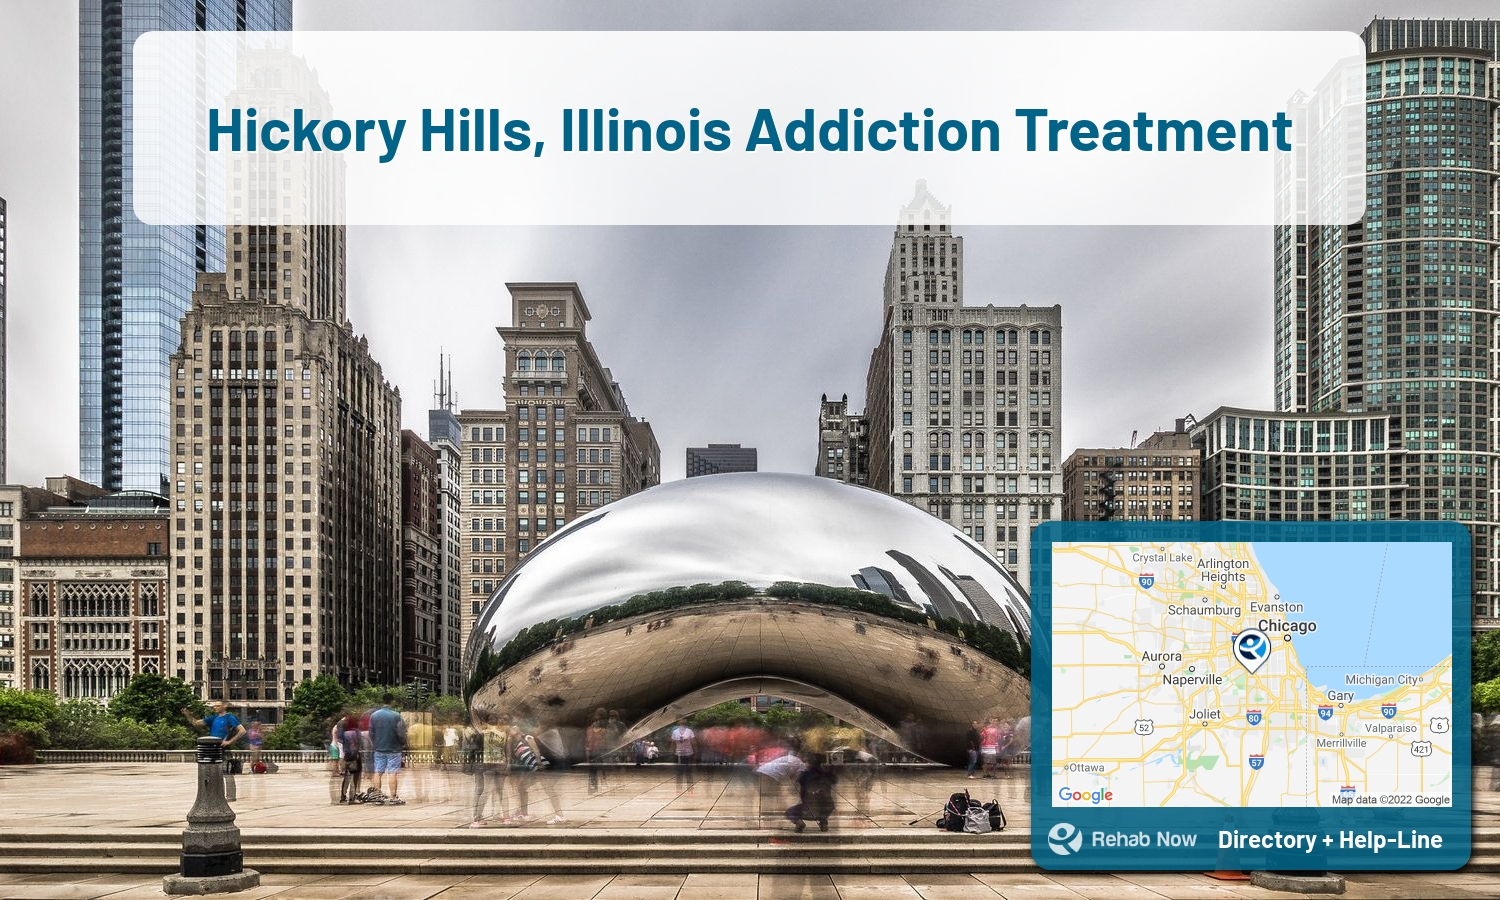 Drug rehab and alcohol treatment services nearby Hickory Hills, IL. Need help choosing a treatment program? Call our free hotline!